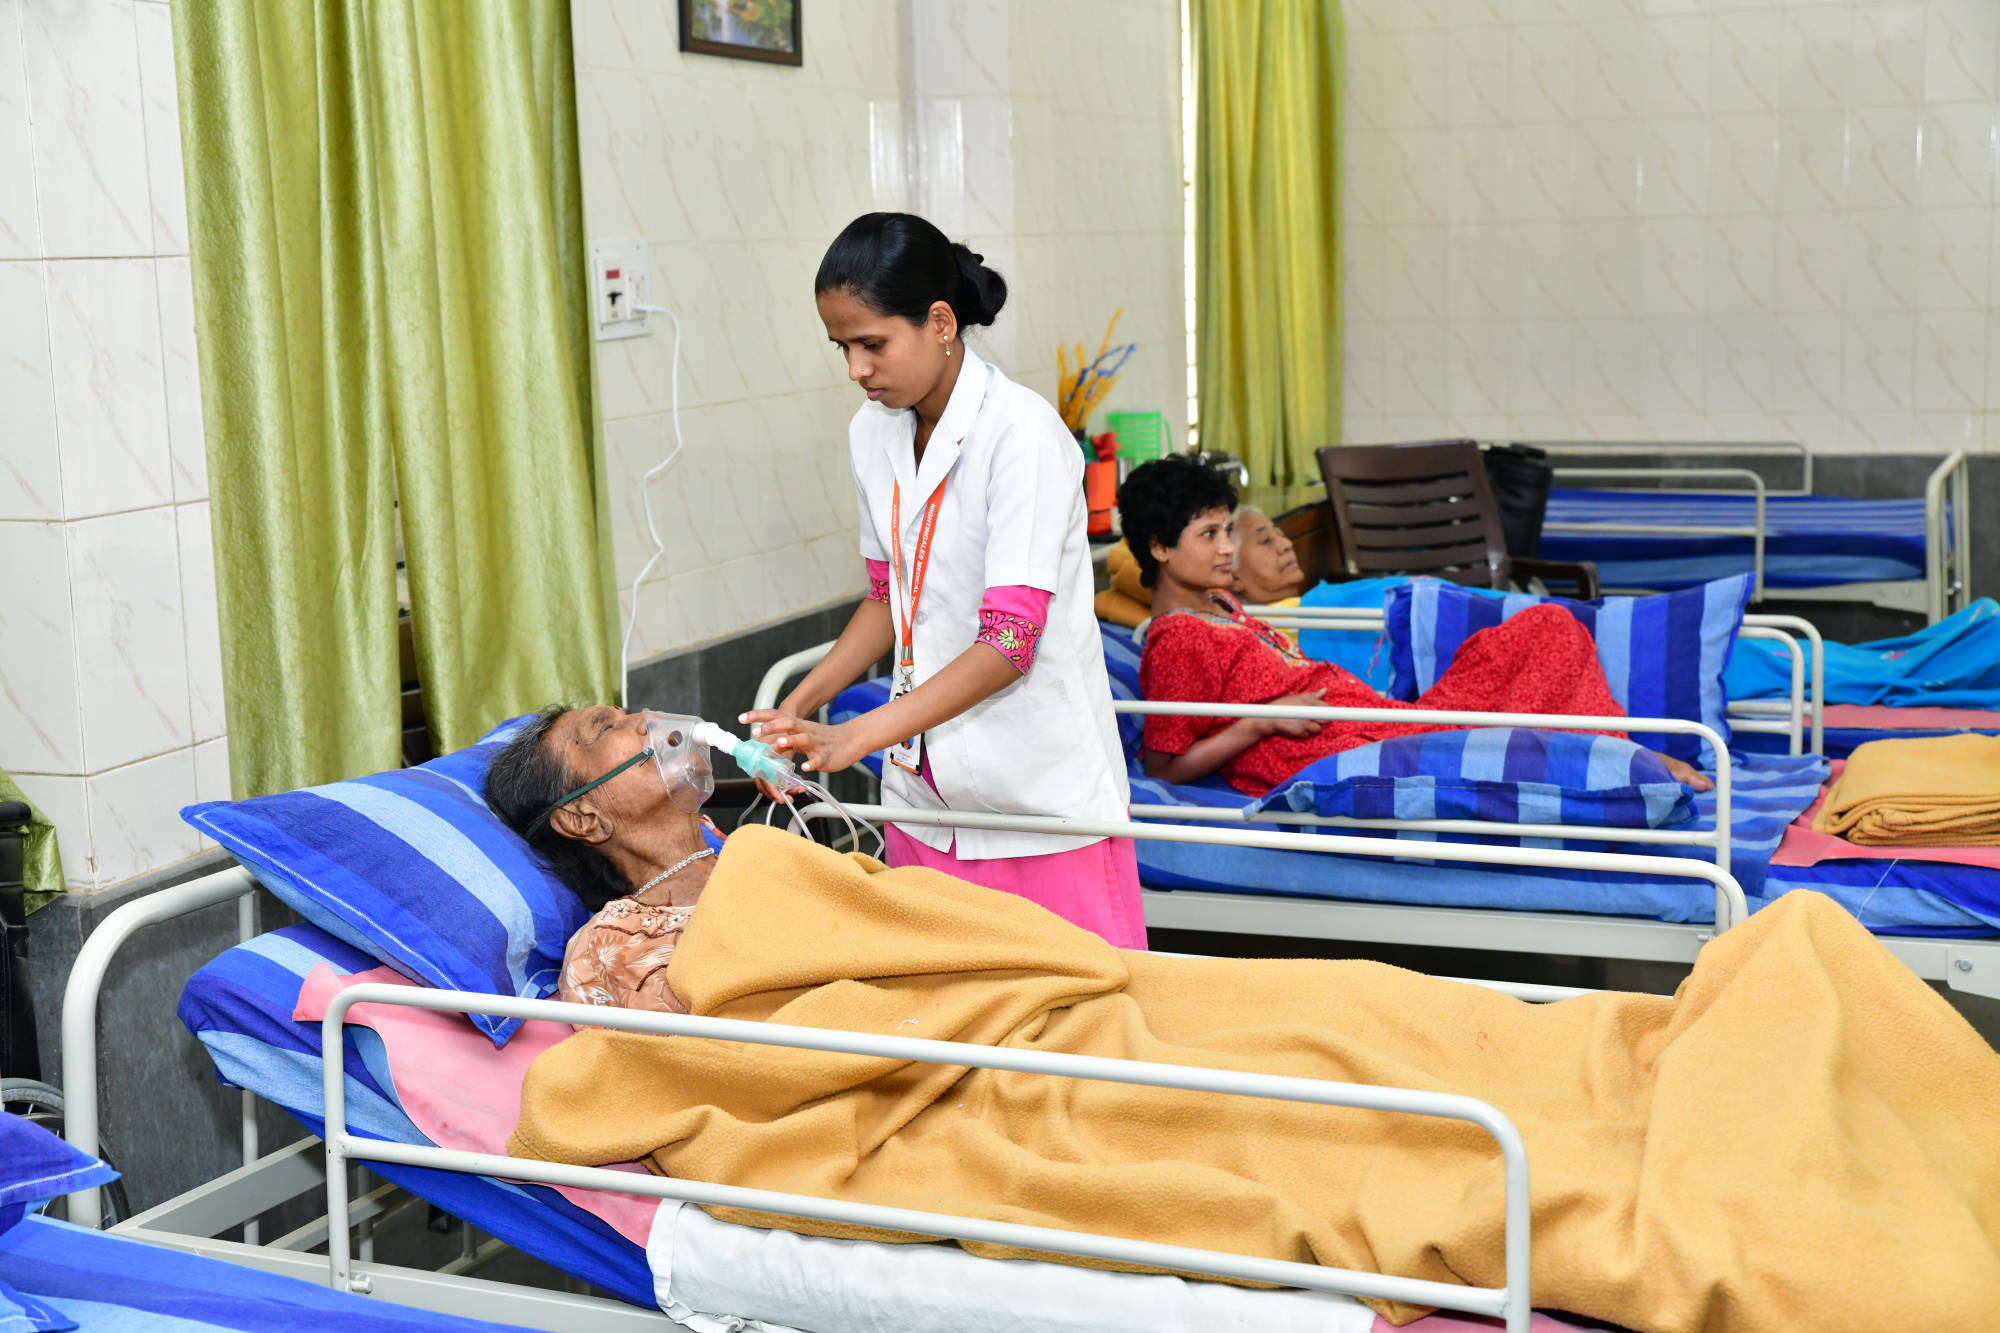 SS has bed-side care for our residents